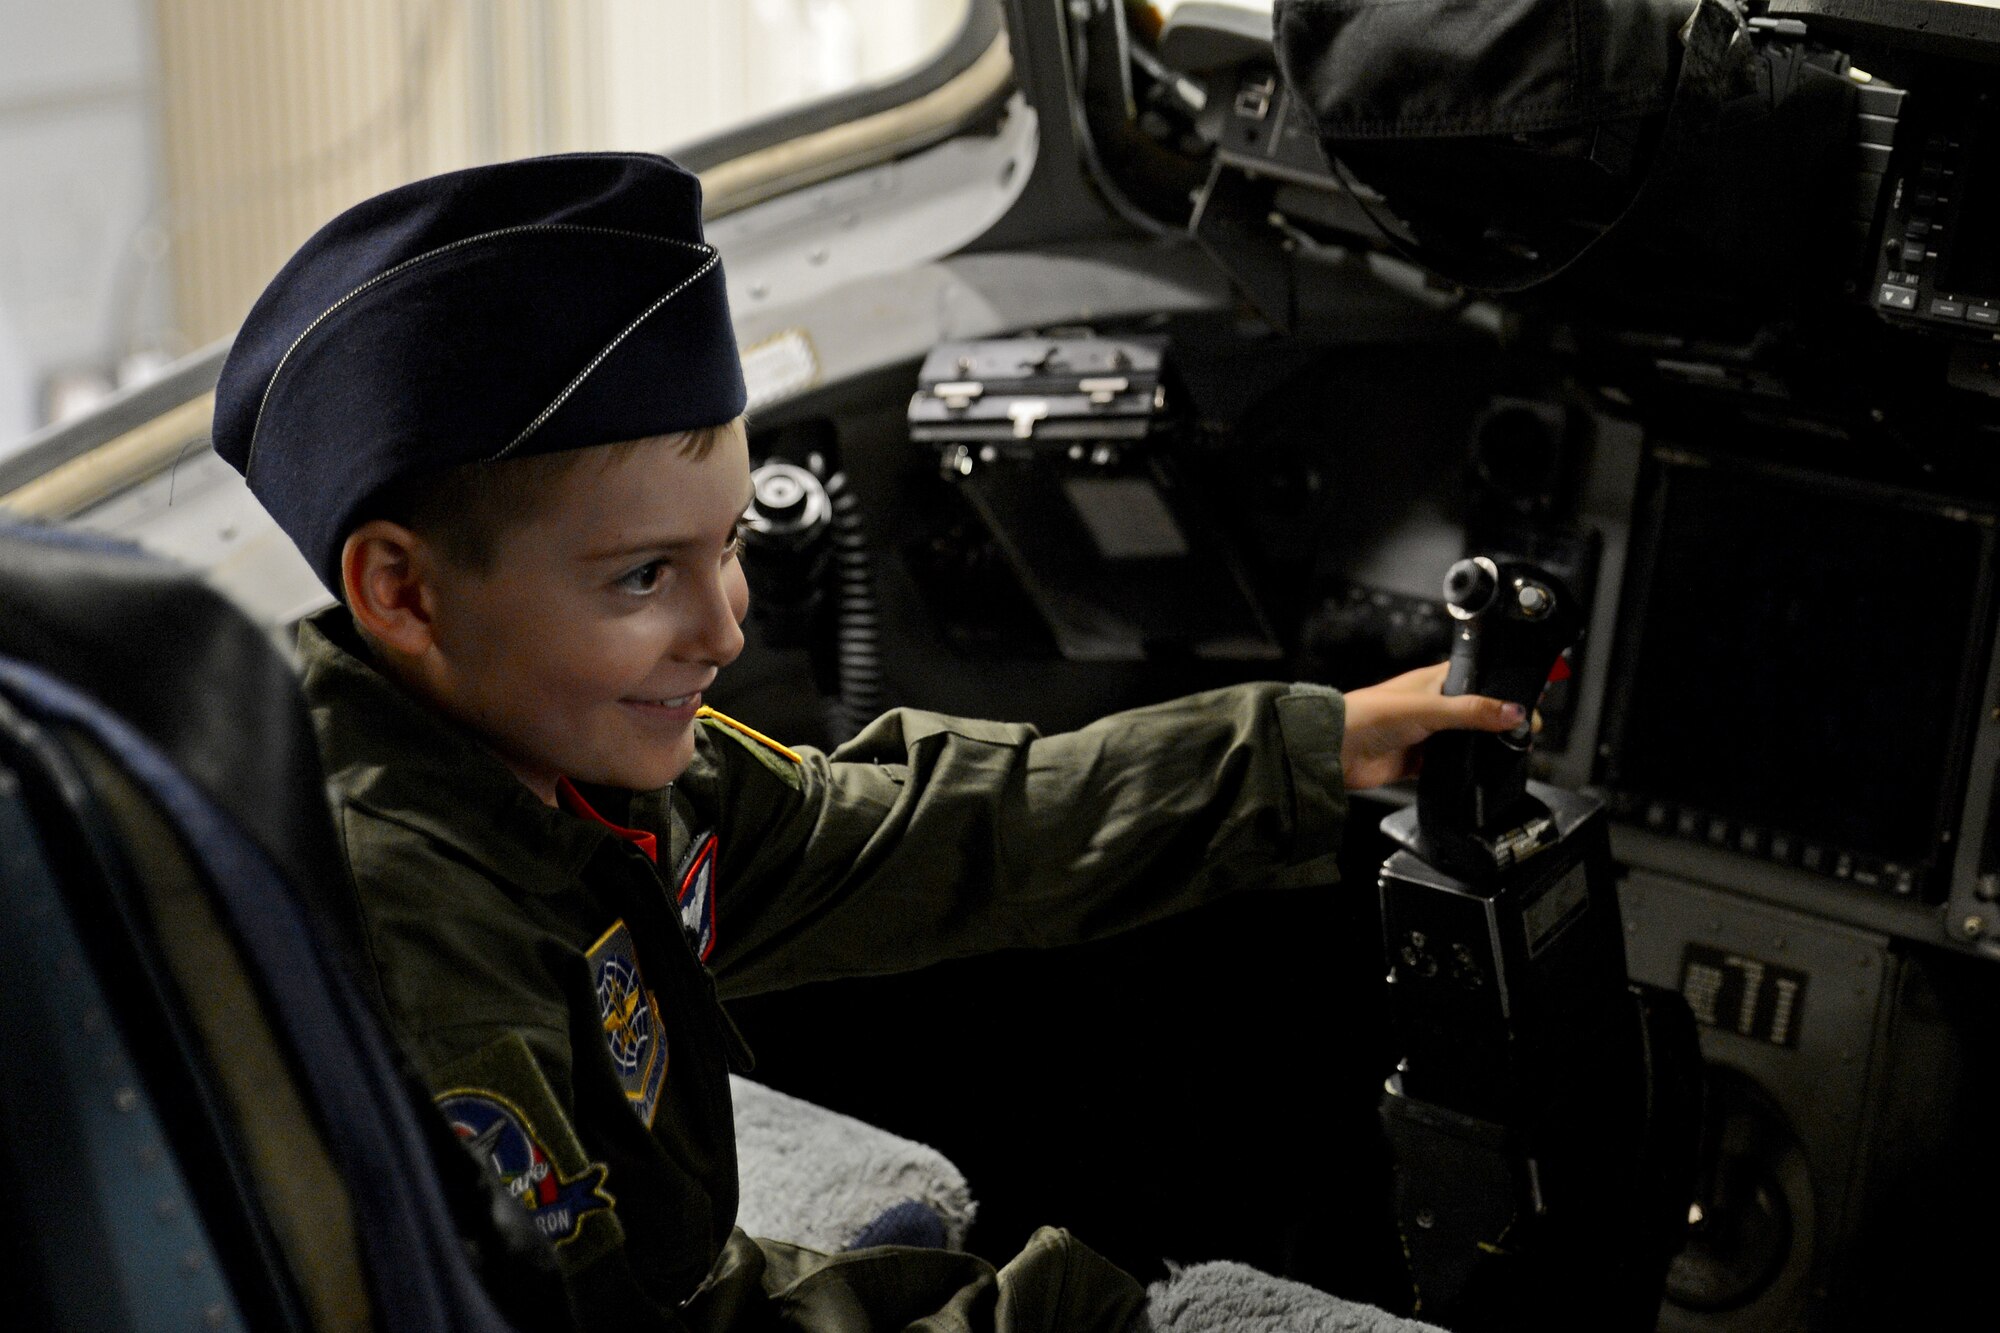 Ewan McFadgen, Pilot for a Day, sits in the pilot seat of a C-17 Globemaster III July 10, 2015, during his tour of Joint Base Lewis-McChord, Wash. McFadgen and his family explored the aircraft before concluding their tour with a C-17 flight simulator. (U.S. Air Force photo/Airman 1st Class Keoni Chavarria)